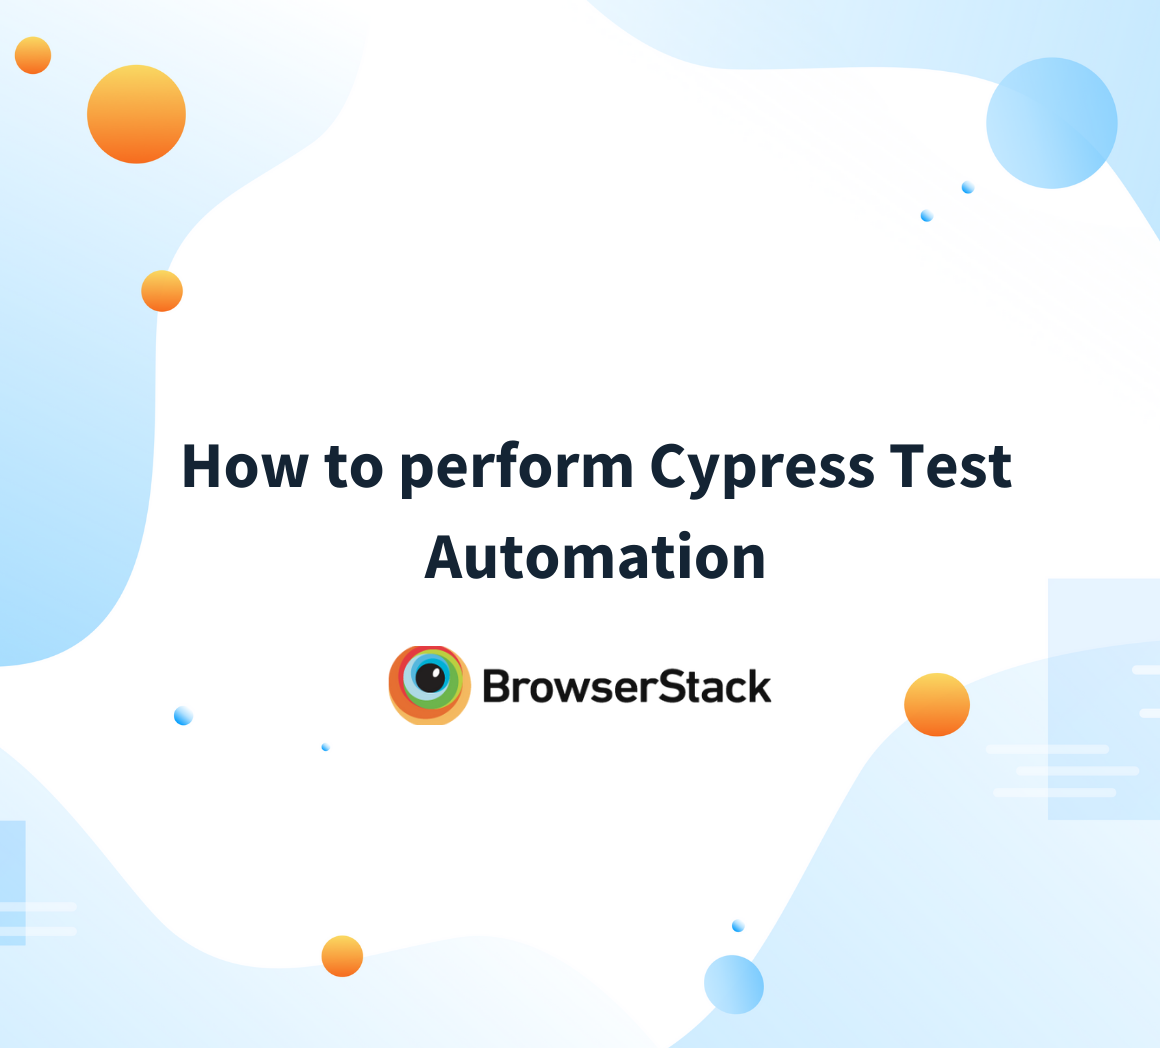 How to perform Cypress Test Automation